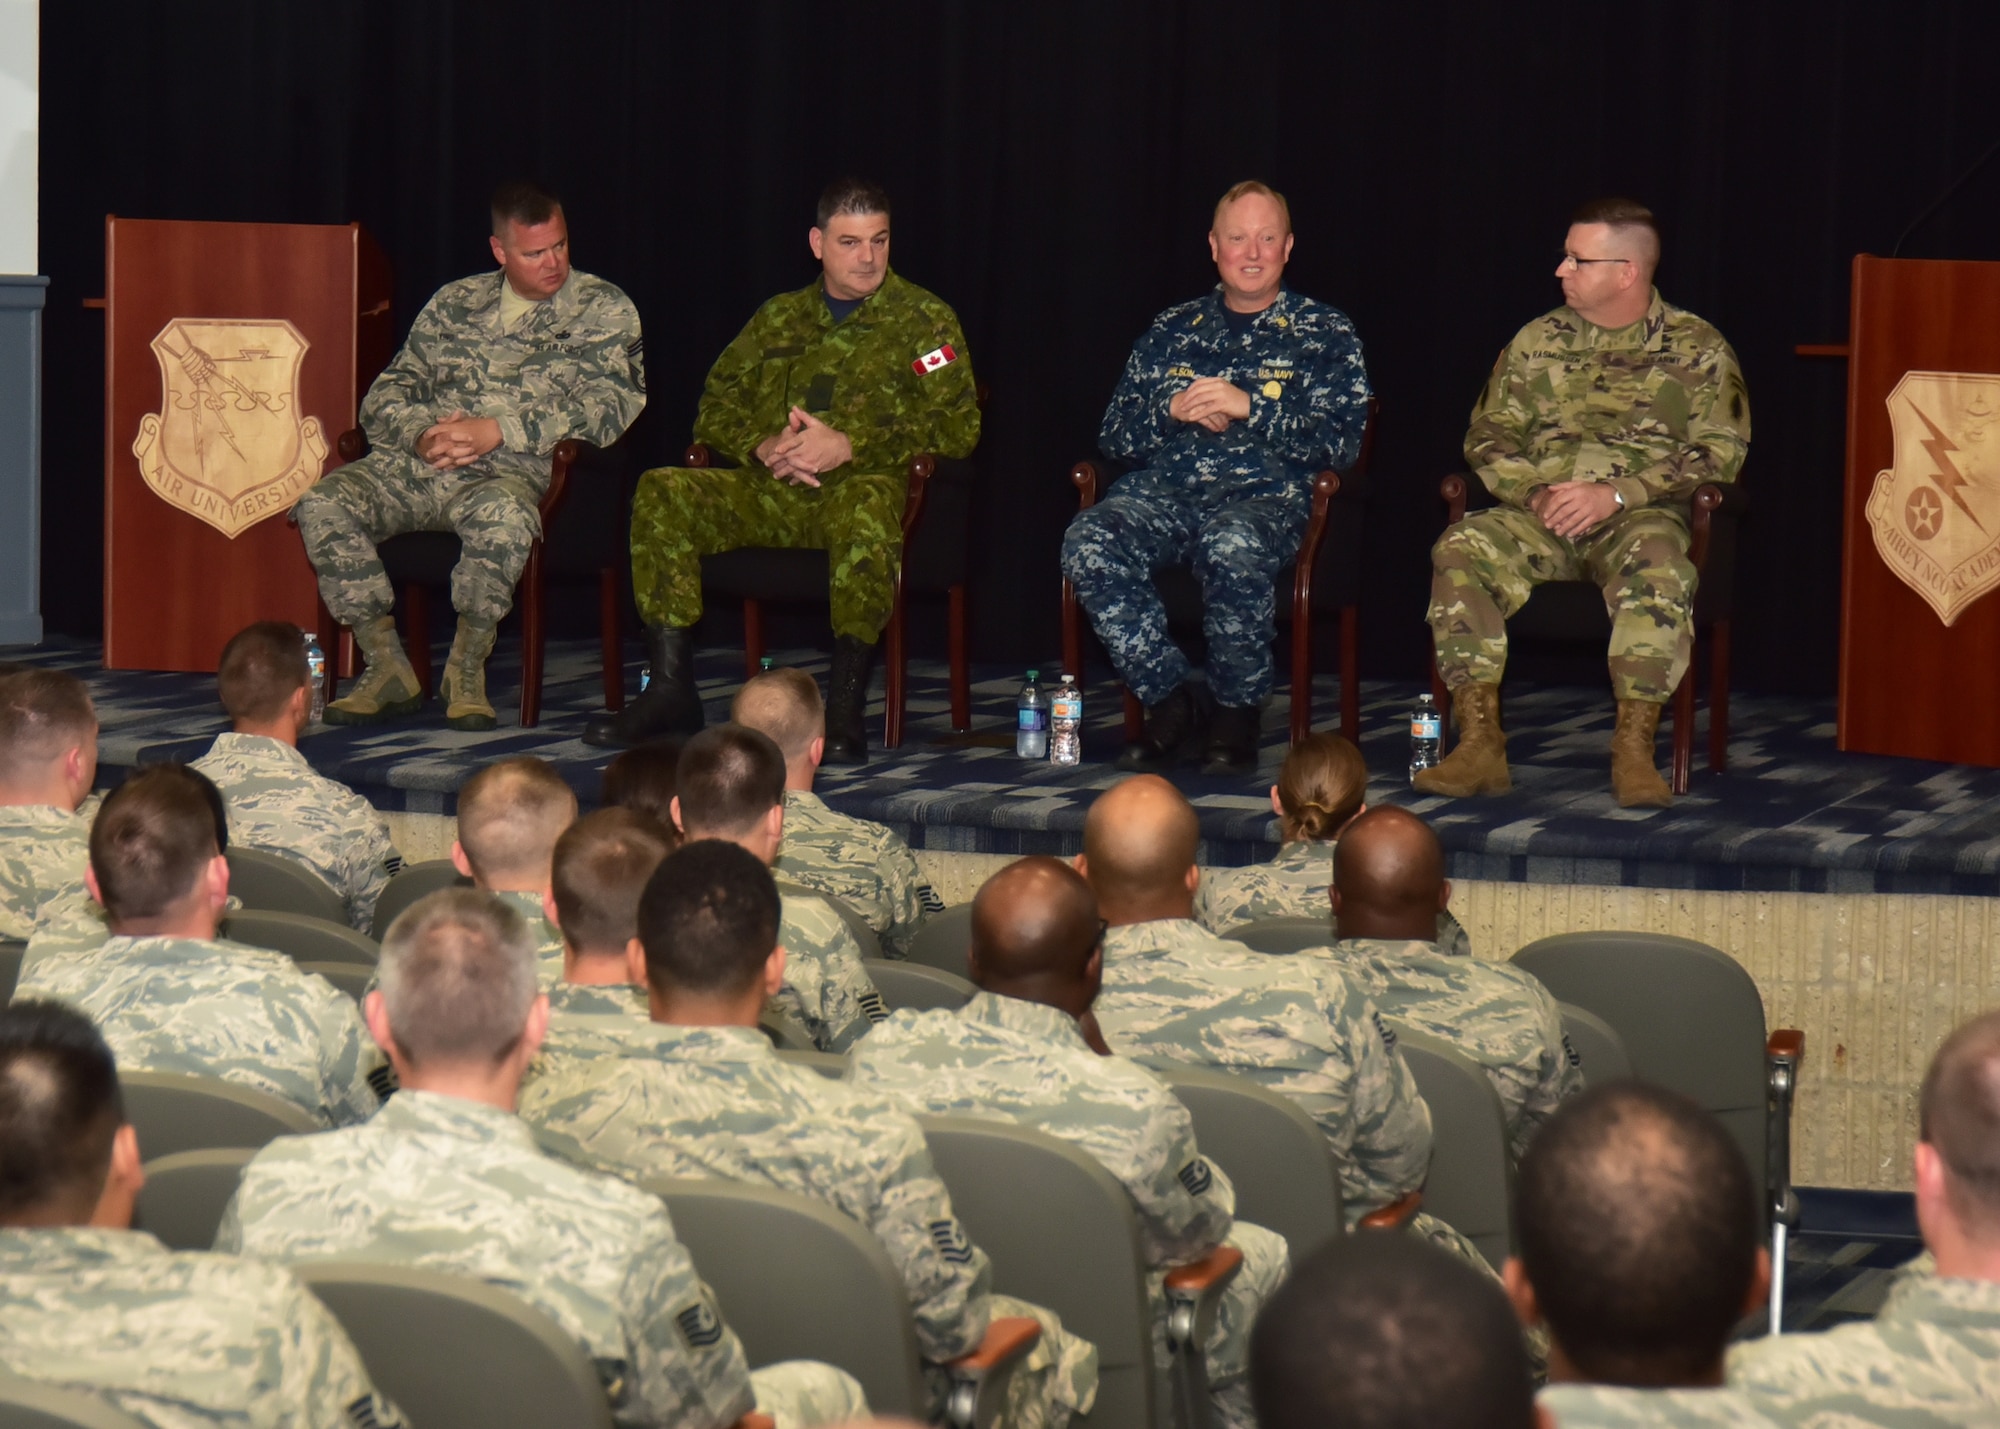 The Paul W. Airey NCO Academy hosted a joint military panel at the Tyndall Air Force Base, Fla., March 24, 2017. The four-man senior enlisted panel included service members from the U.S. Air Force, U.S. Army, U.S. Navy and the Royal Canadian Air Force and discussed career choices, answered student questions and provided detailed insight on joint environments. (U.S. Air Force photo by Senior Airman Sergio A. Gamboa/Released)